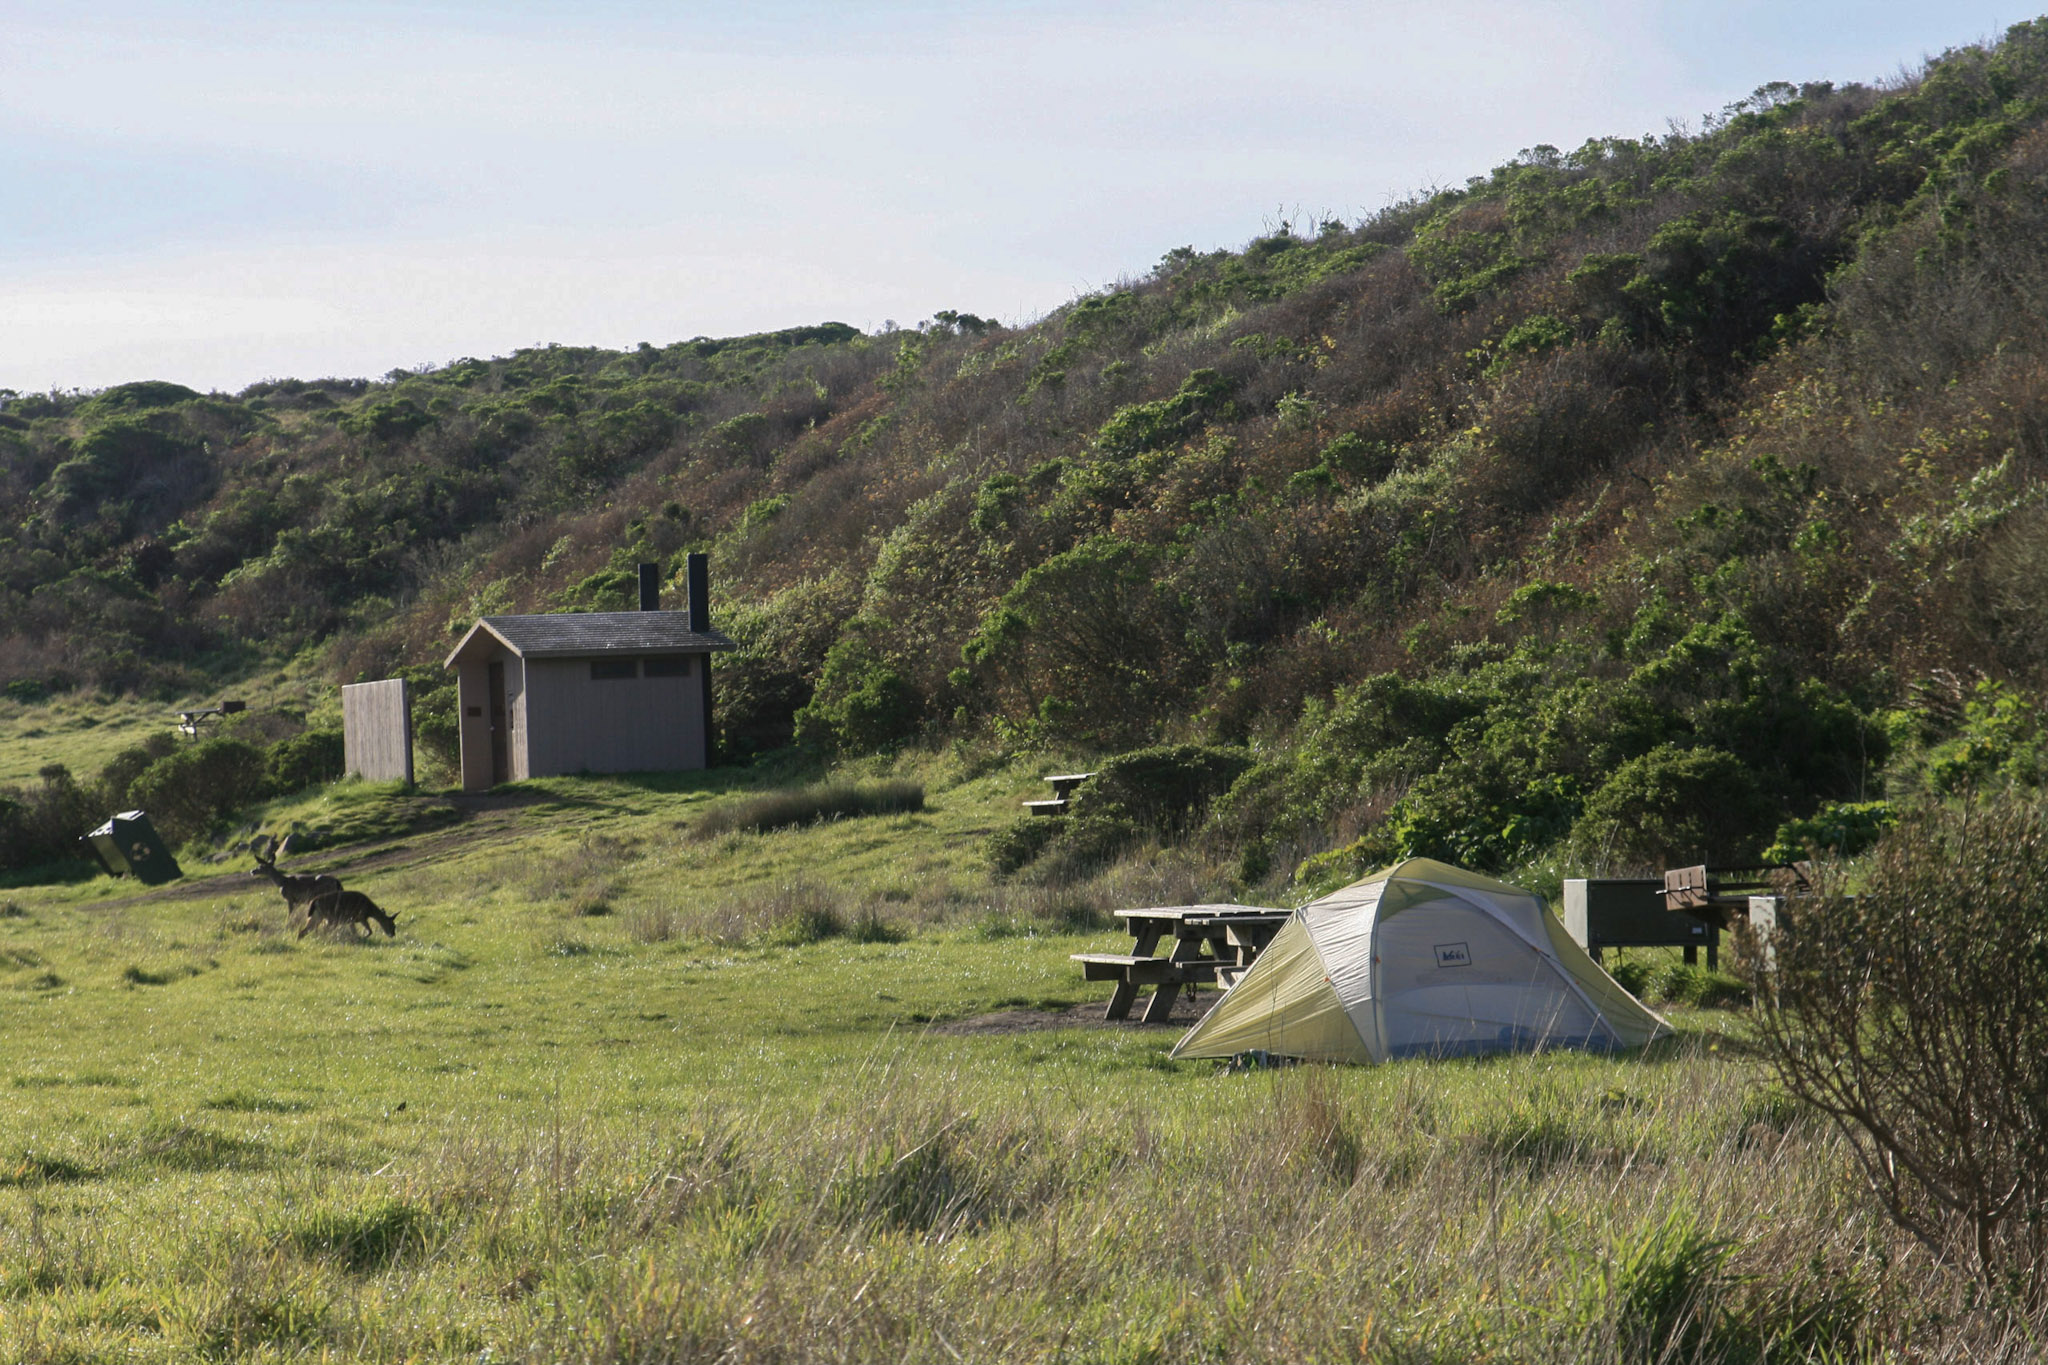 A yellow and gray tent in a grassy field to the left of a shrubby ridge. Deer are grazing a bit beyond the tent on the far left. Vault toilets are in the background.